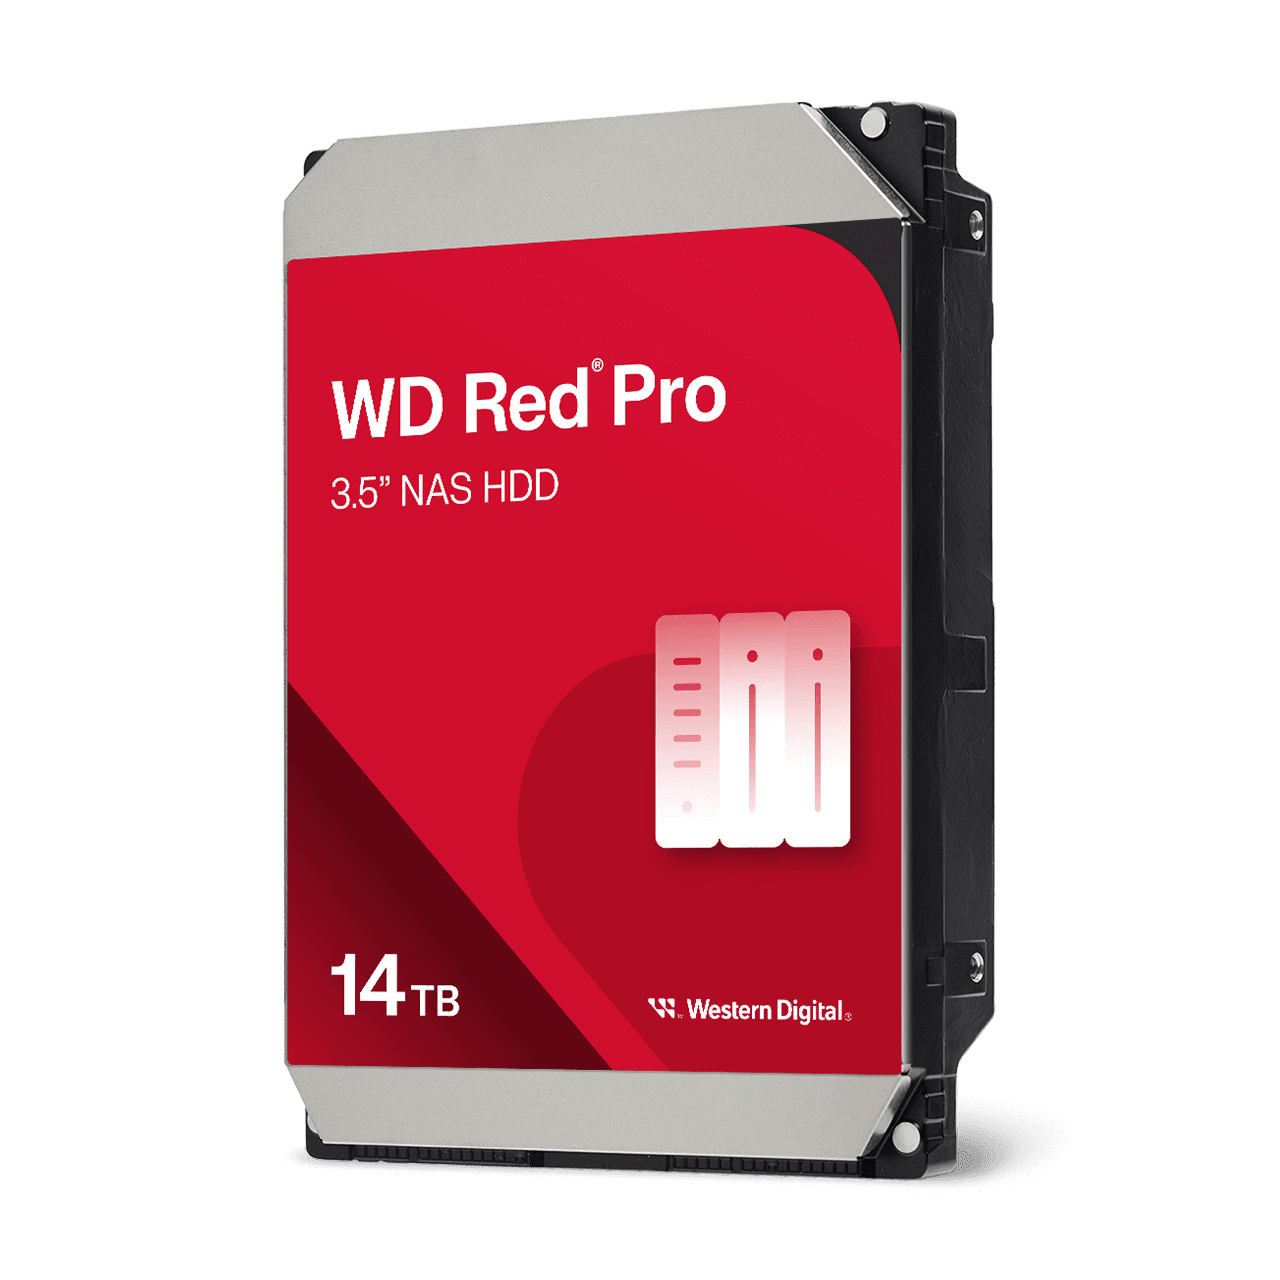 WD Red™ Pro 14TB NAS Hard Drive - Image7